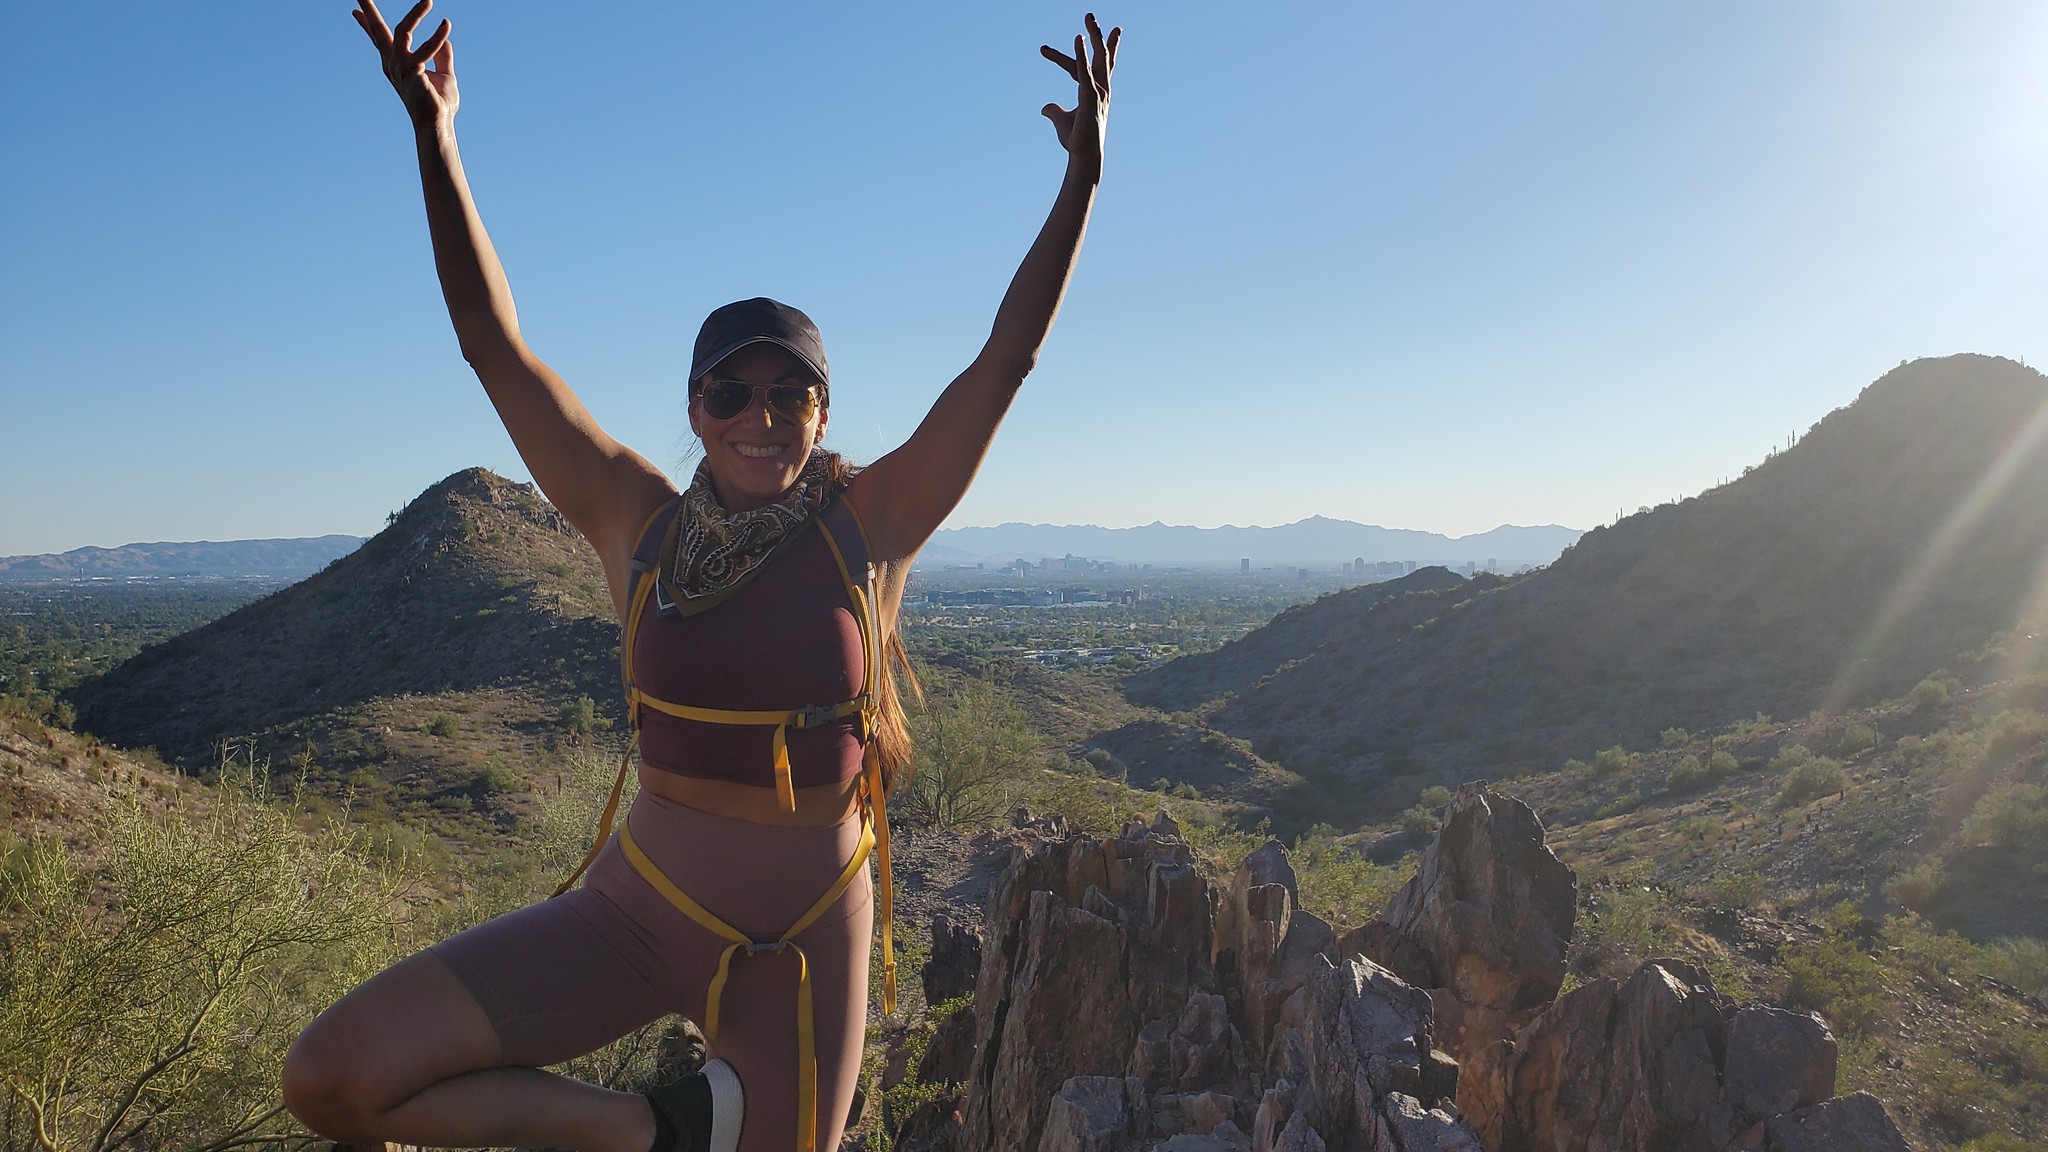 A female guest can hardly contain her joy while posing for this picture in front of an incredible vista during a Phoenix hiking tour with girl friends from the Wild Bunch Desert Guides.